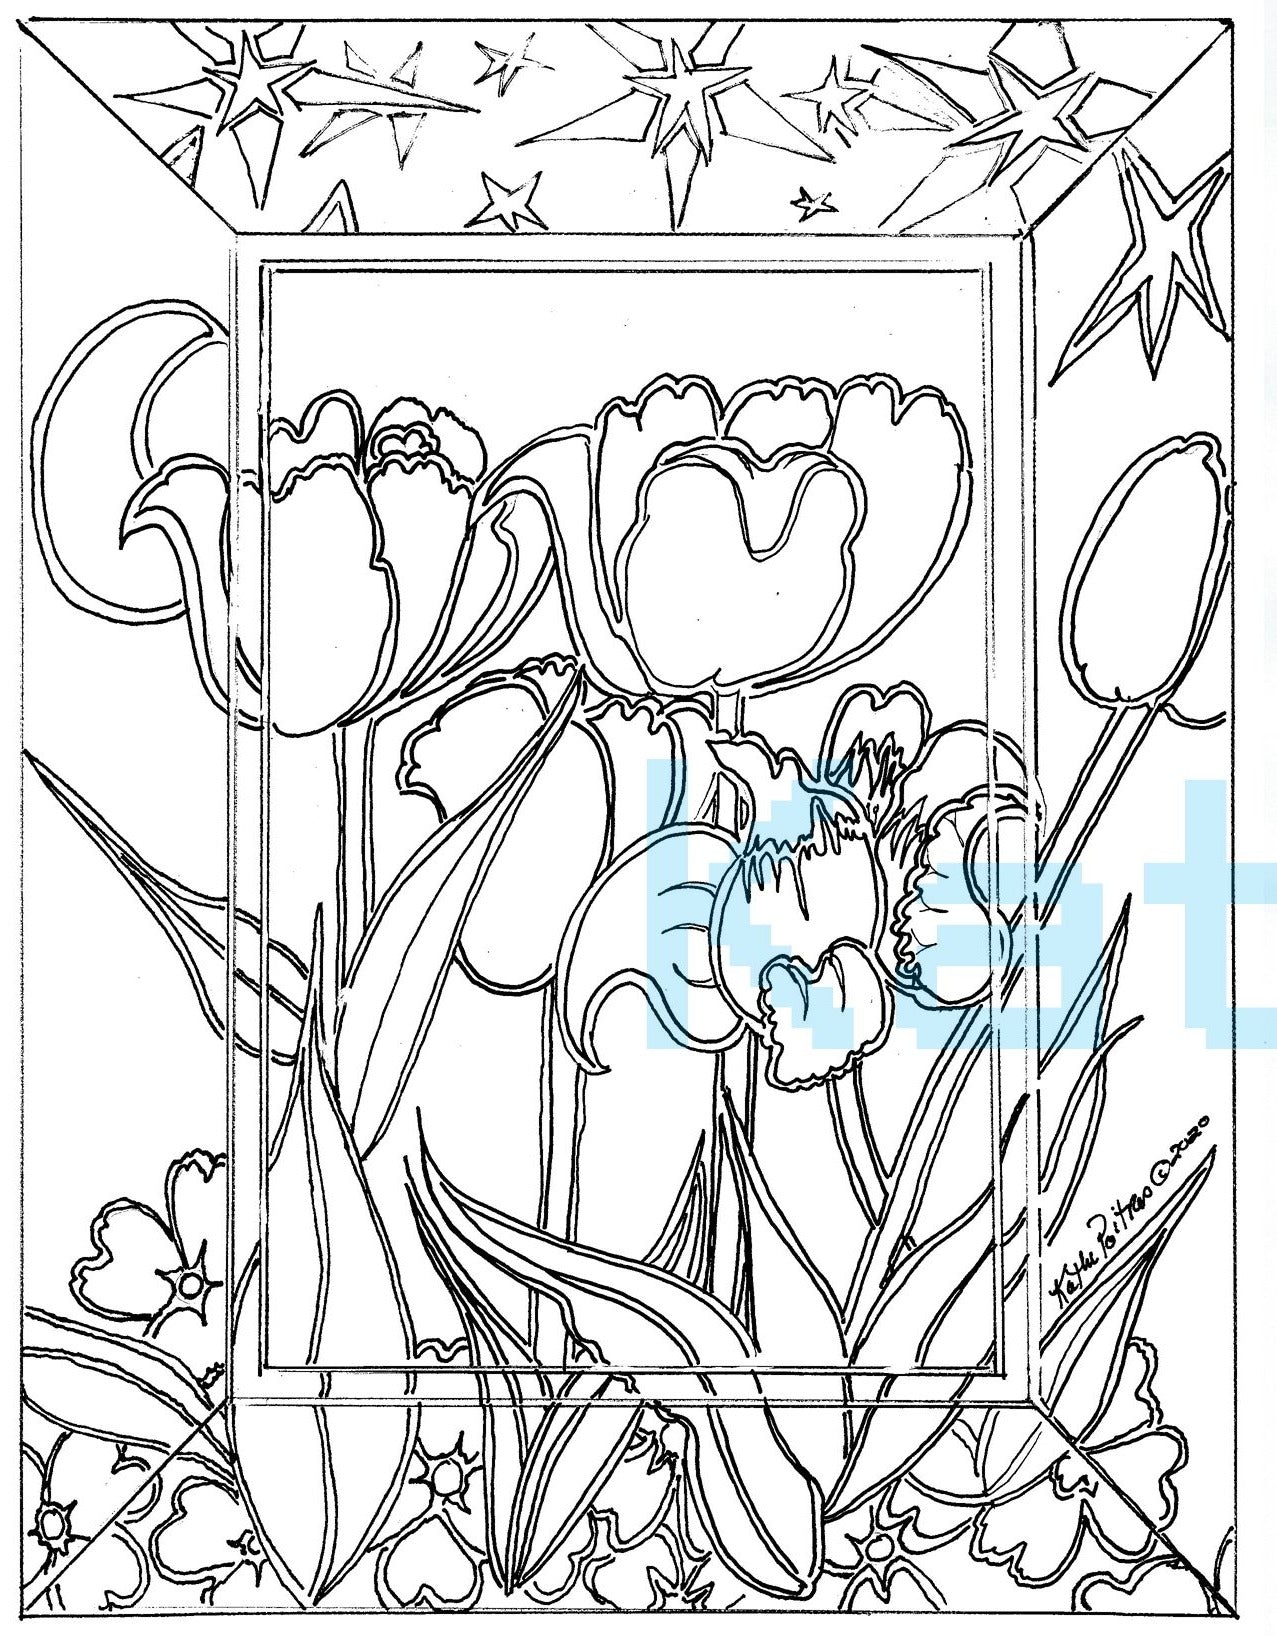 color these cosmic Tulips! Delicately illustrated by artist Kathy Poitras, this picture features a group of classic tulips in the center, with stunning stars and a moon in the border.